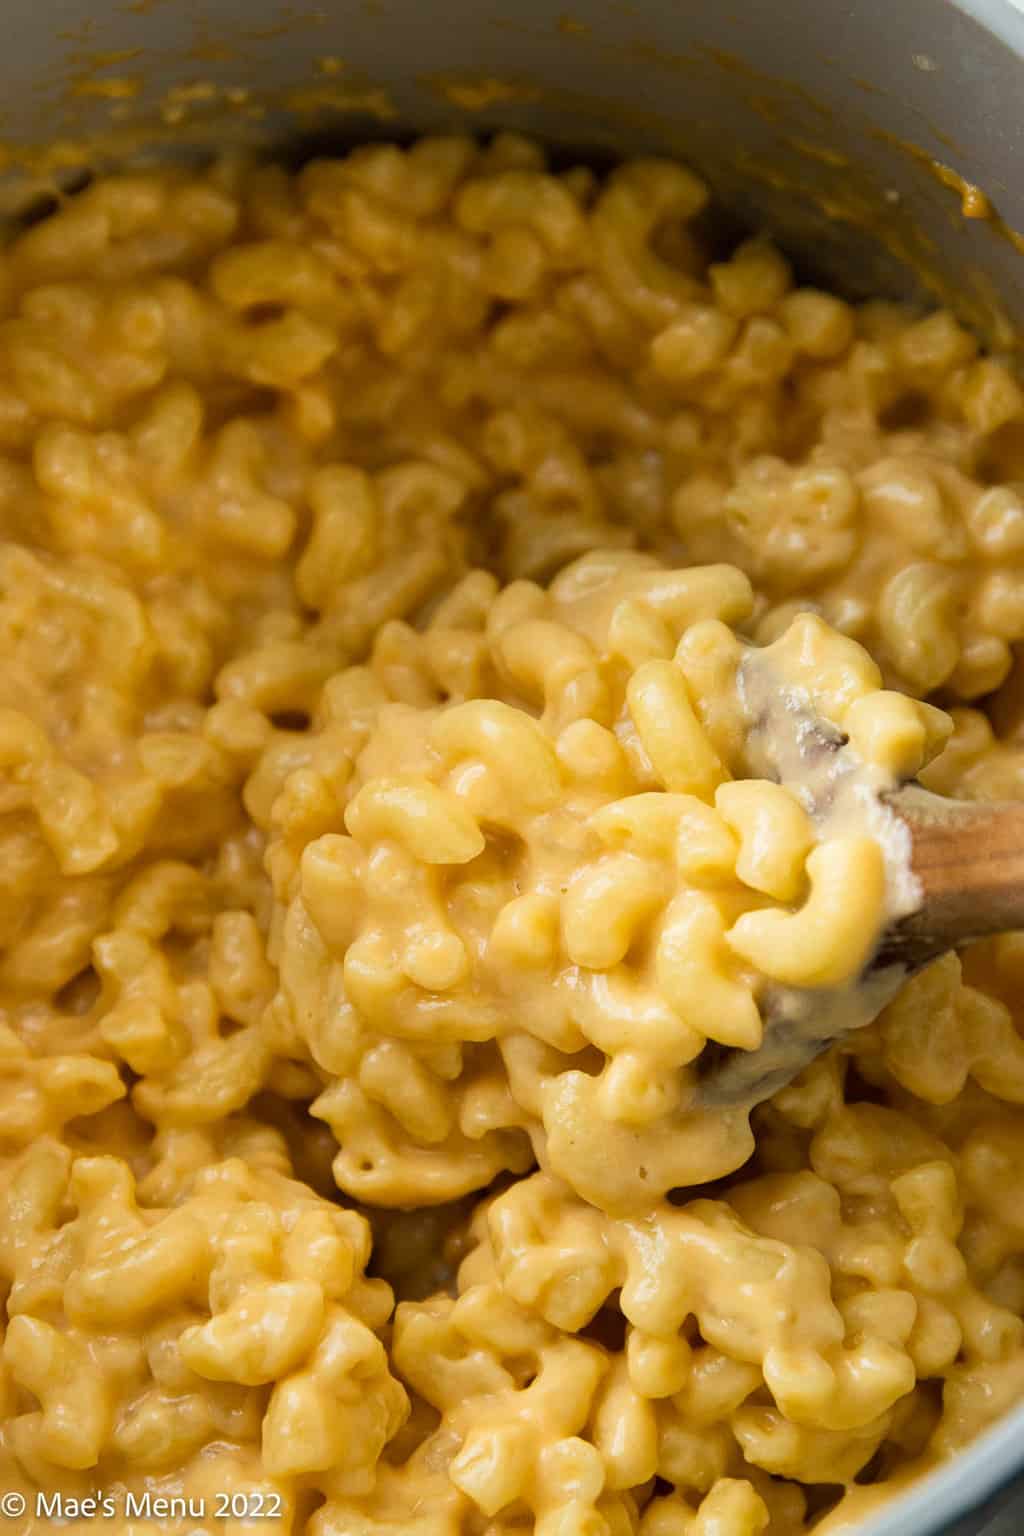 An up-close shot of a wooden spoon of macaroni and cheese in a saucepan.